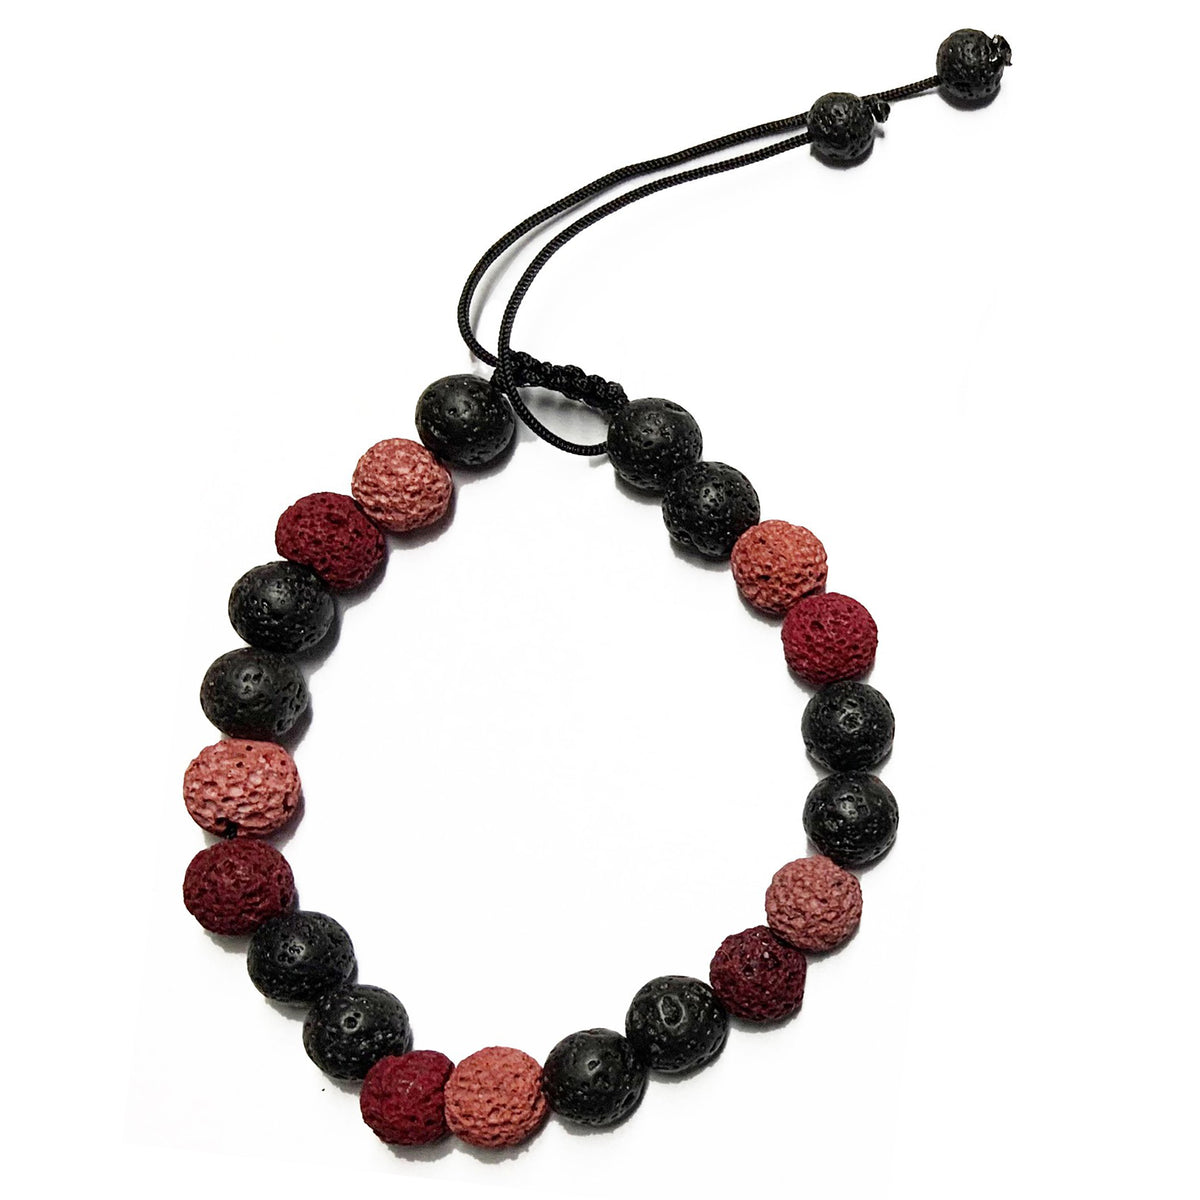 Bead bracelets for women in different colors